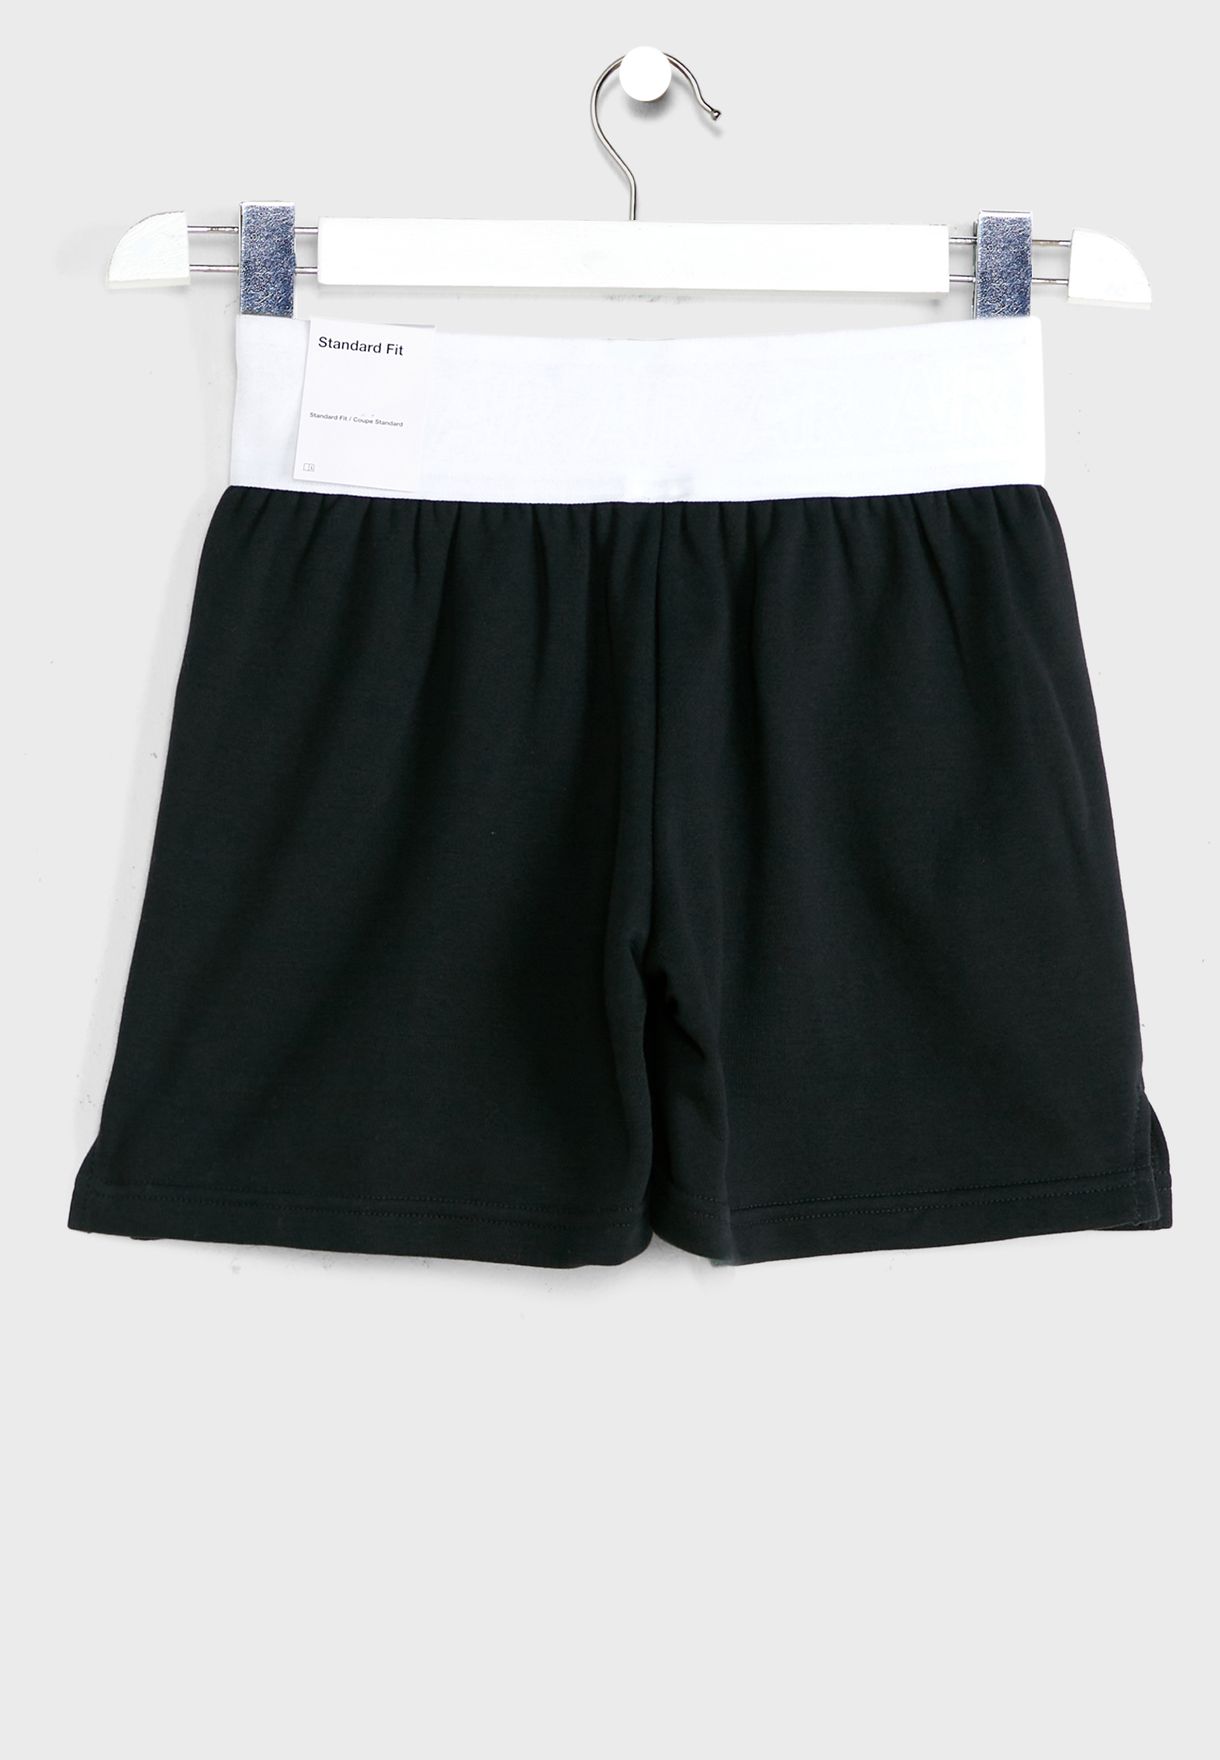 5" Youth Nsw Air Ft  Shorts